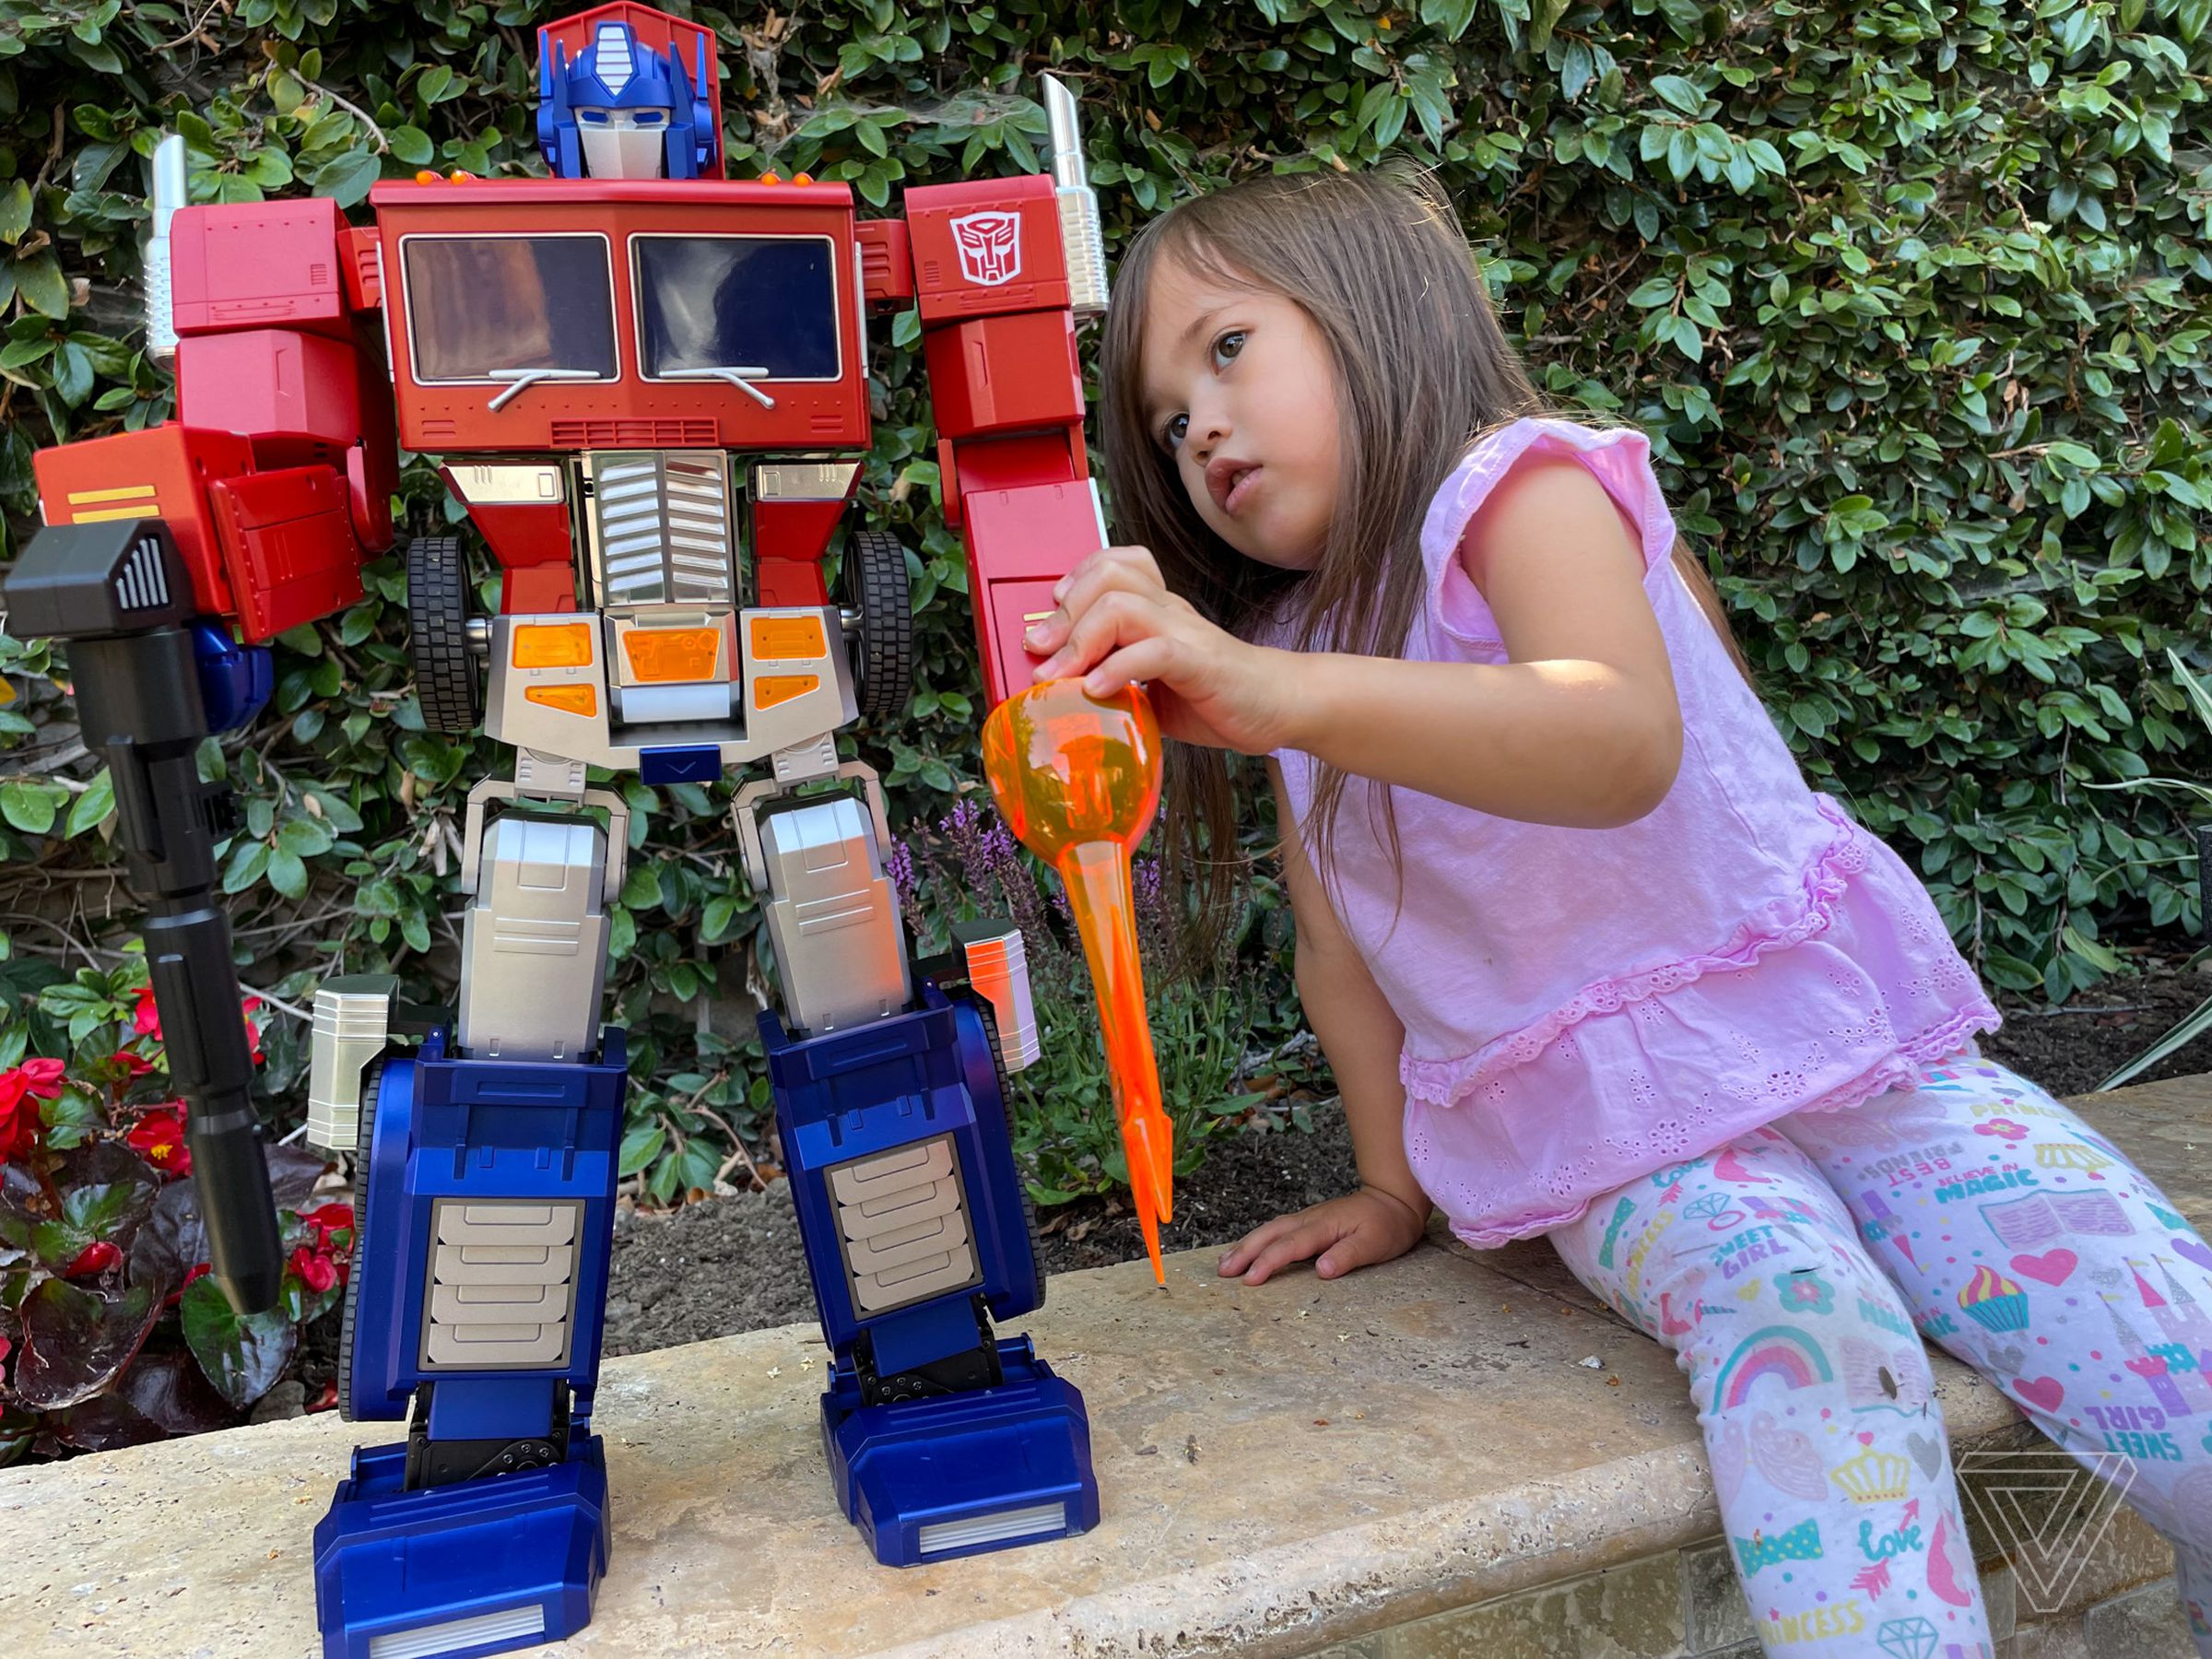 She also programmed Optimus to pose this way.